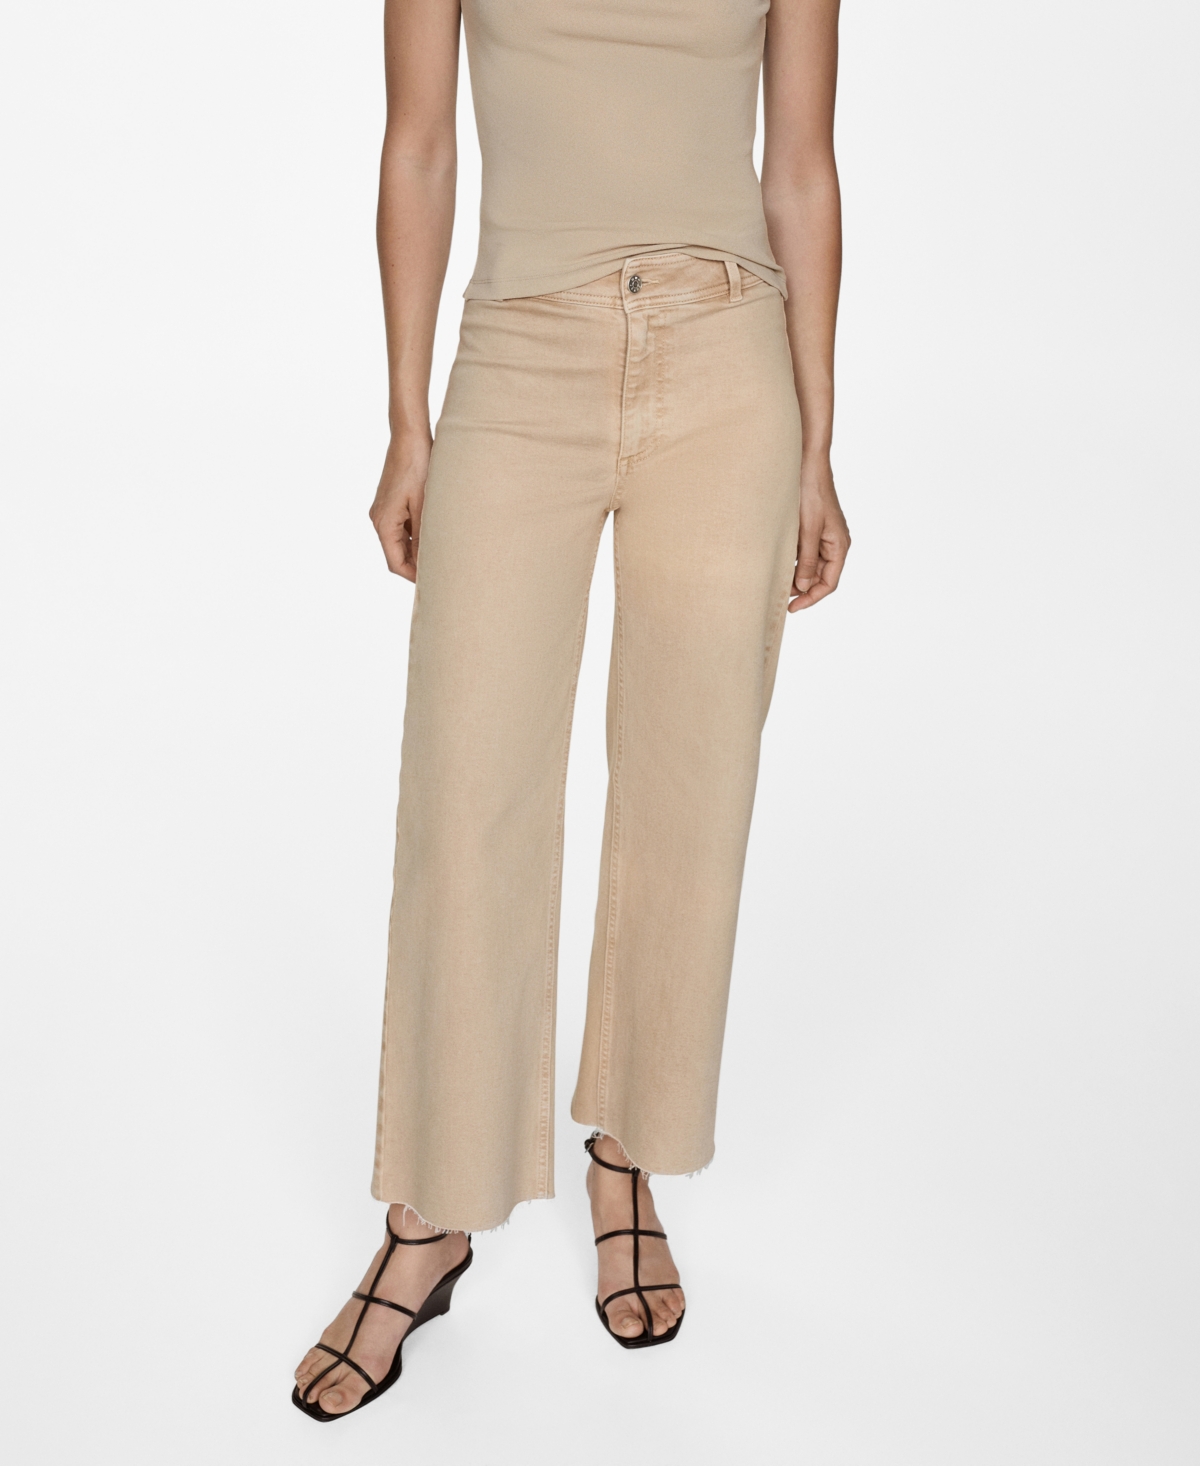 Women's Catherin Culotte High Rise Jeans - Sandy